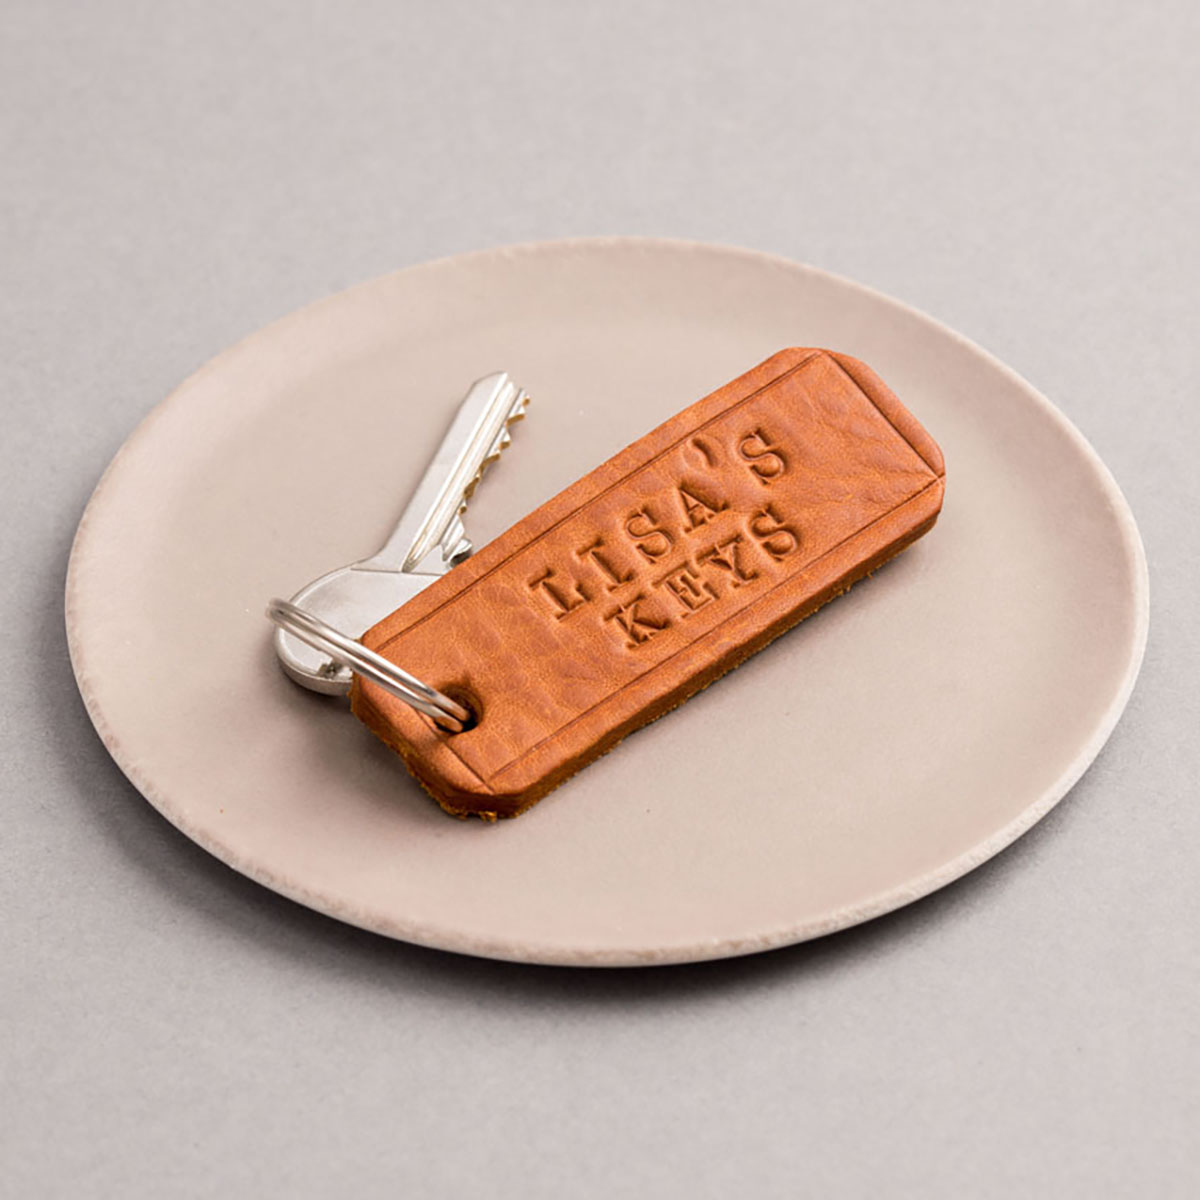 Personalised Posh Totty Designs Leather Key Ring